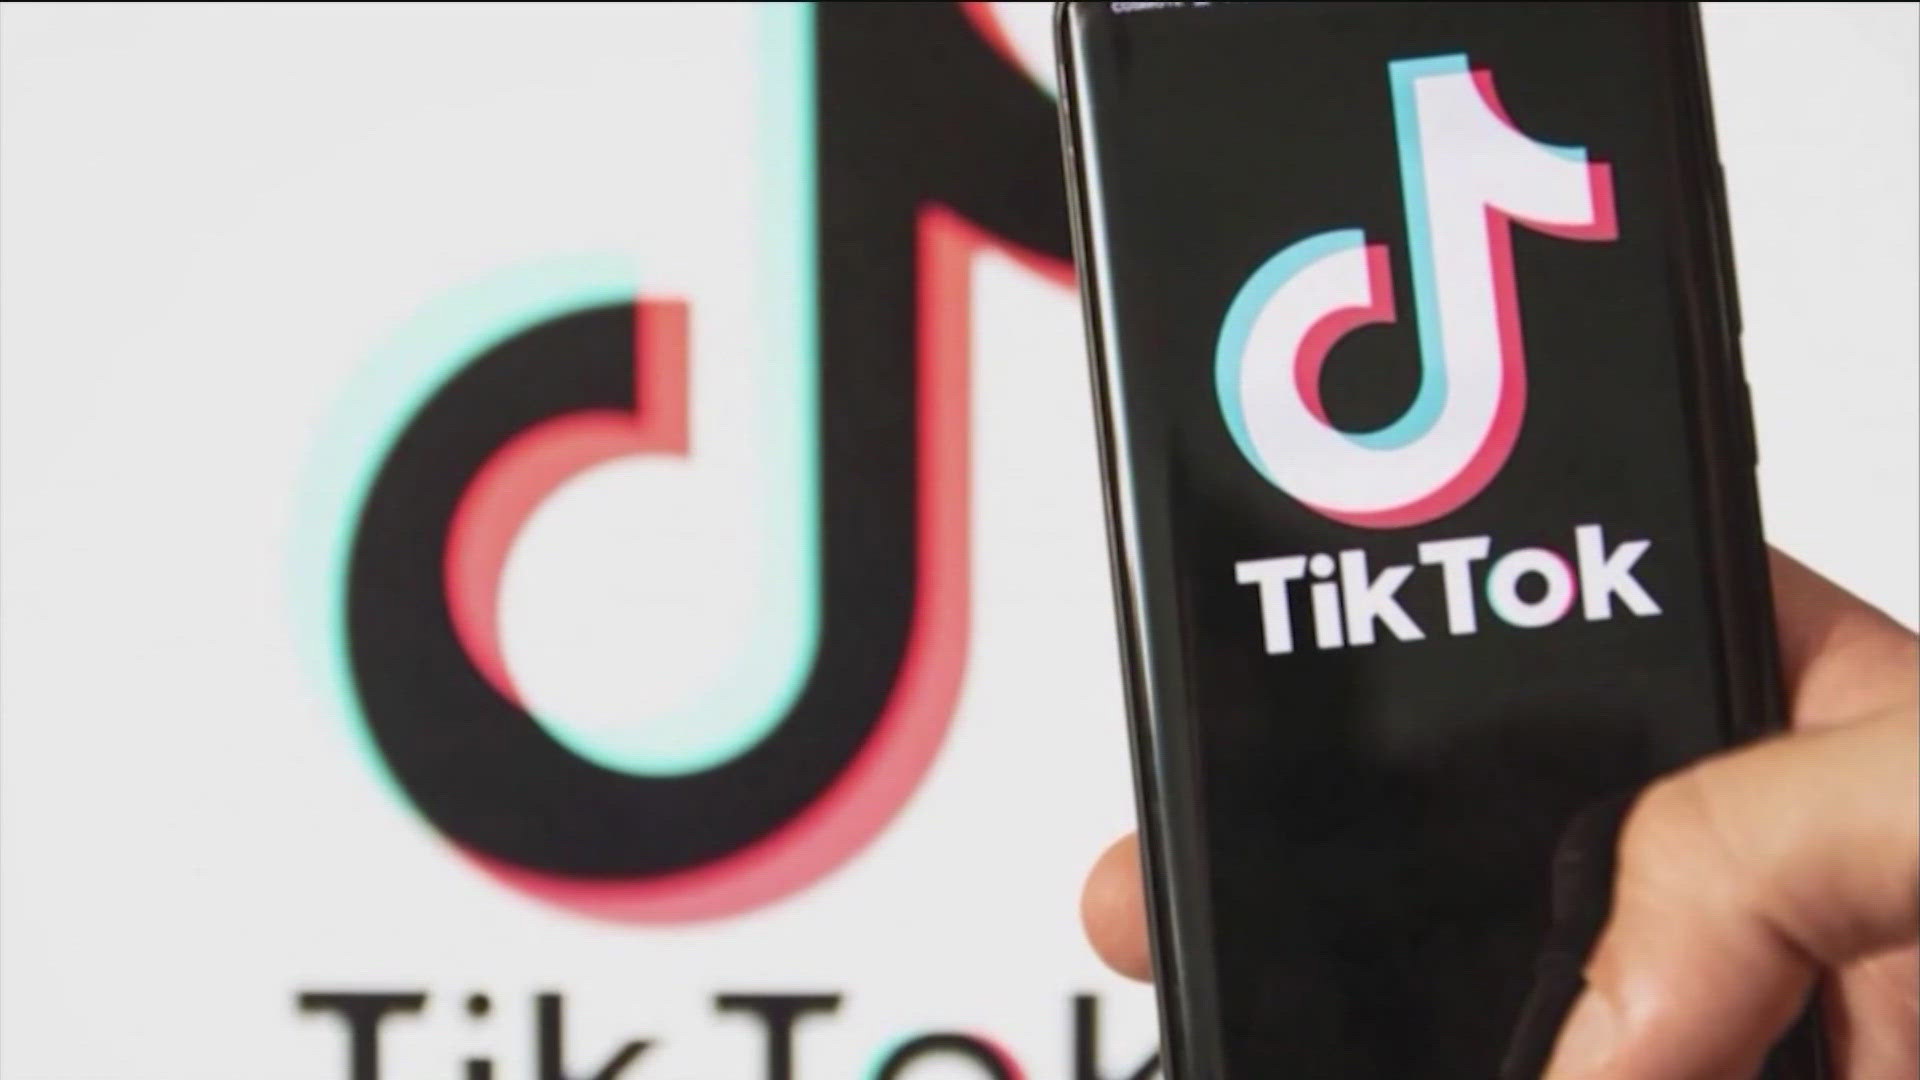 The law requires TikTok’s parent company, ByteDance, to sell the platform within nine months.